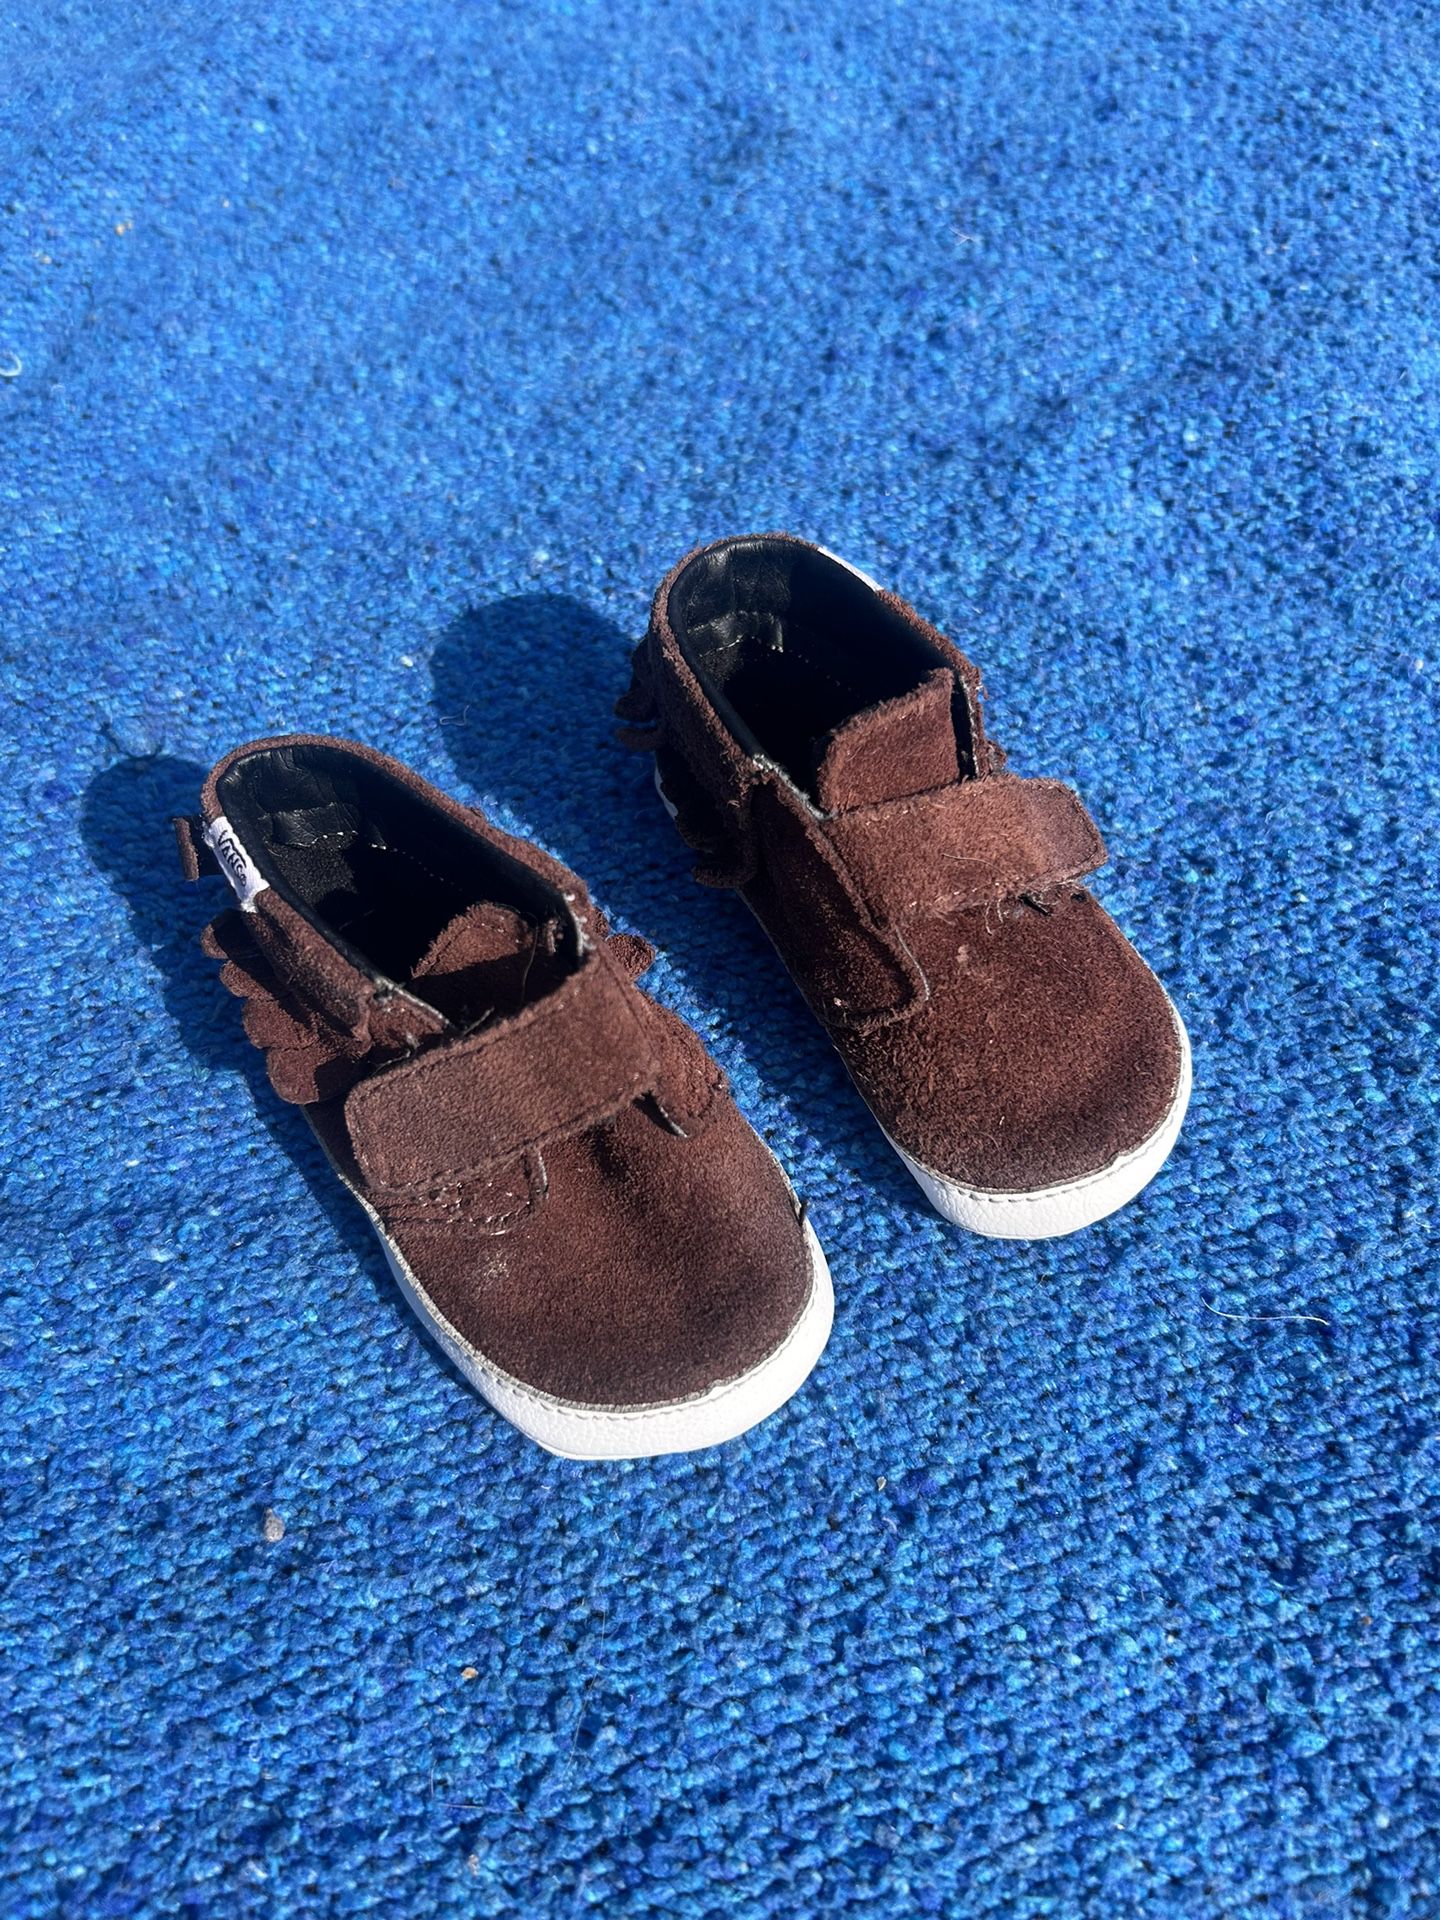 Vans Baby Shoes Size 3 